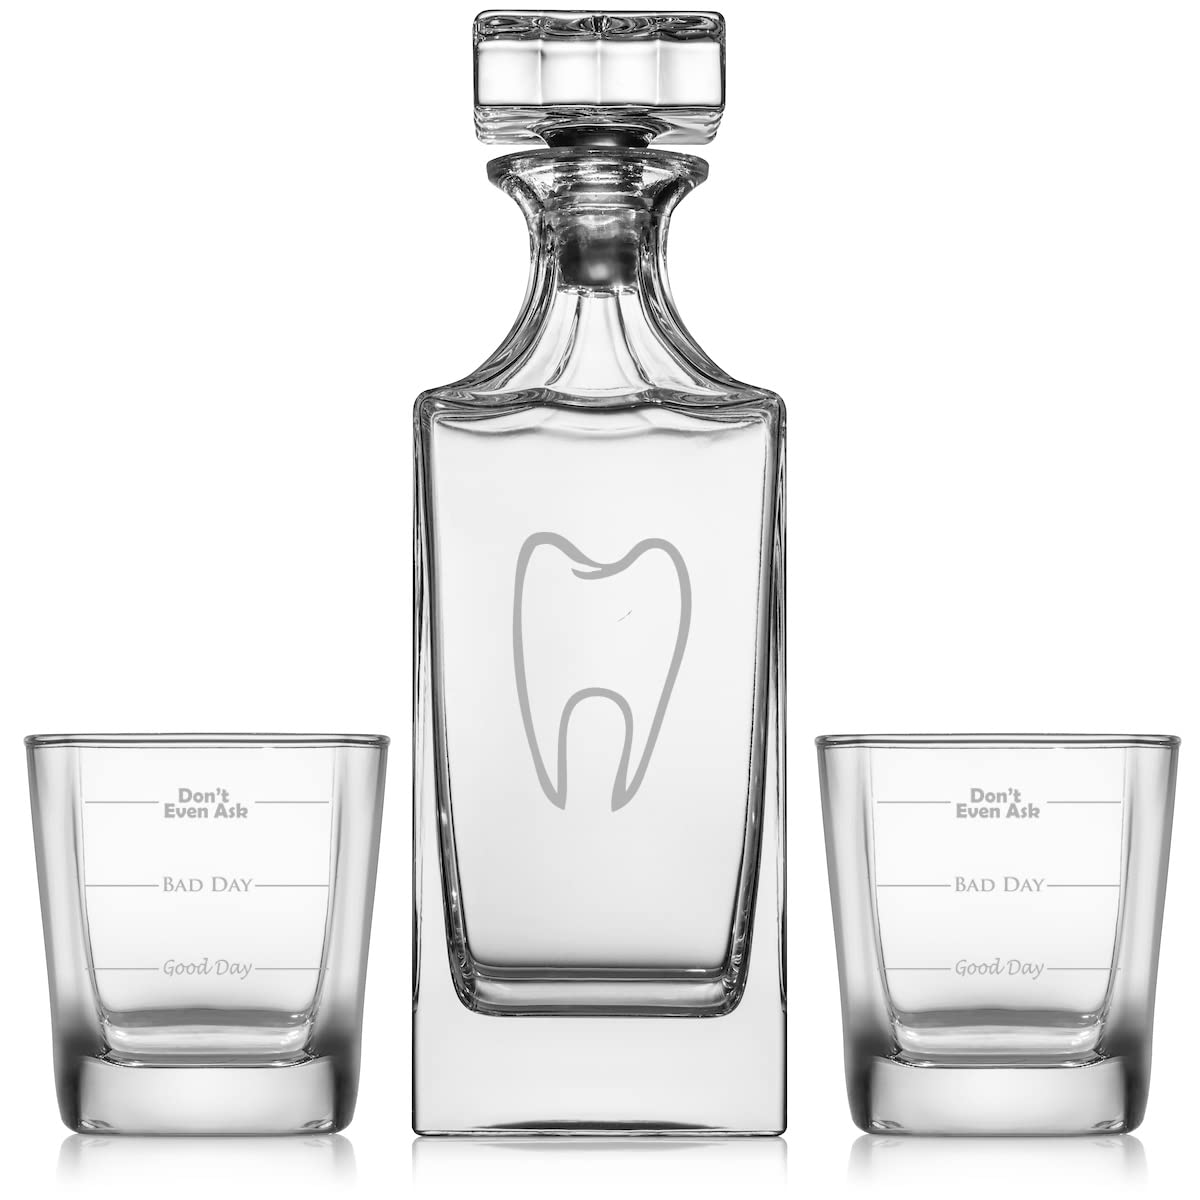 Whiskey Decanter Gift Set With 2 Whiskey Old Fashioned Rocks Glasses Dentist Dental Assistant Hygienist Tooth Good Day Bad Day Don't Even Ask Fill Lines Funny